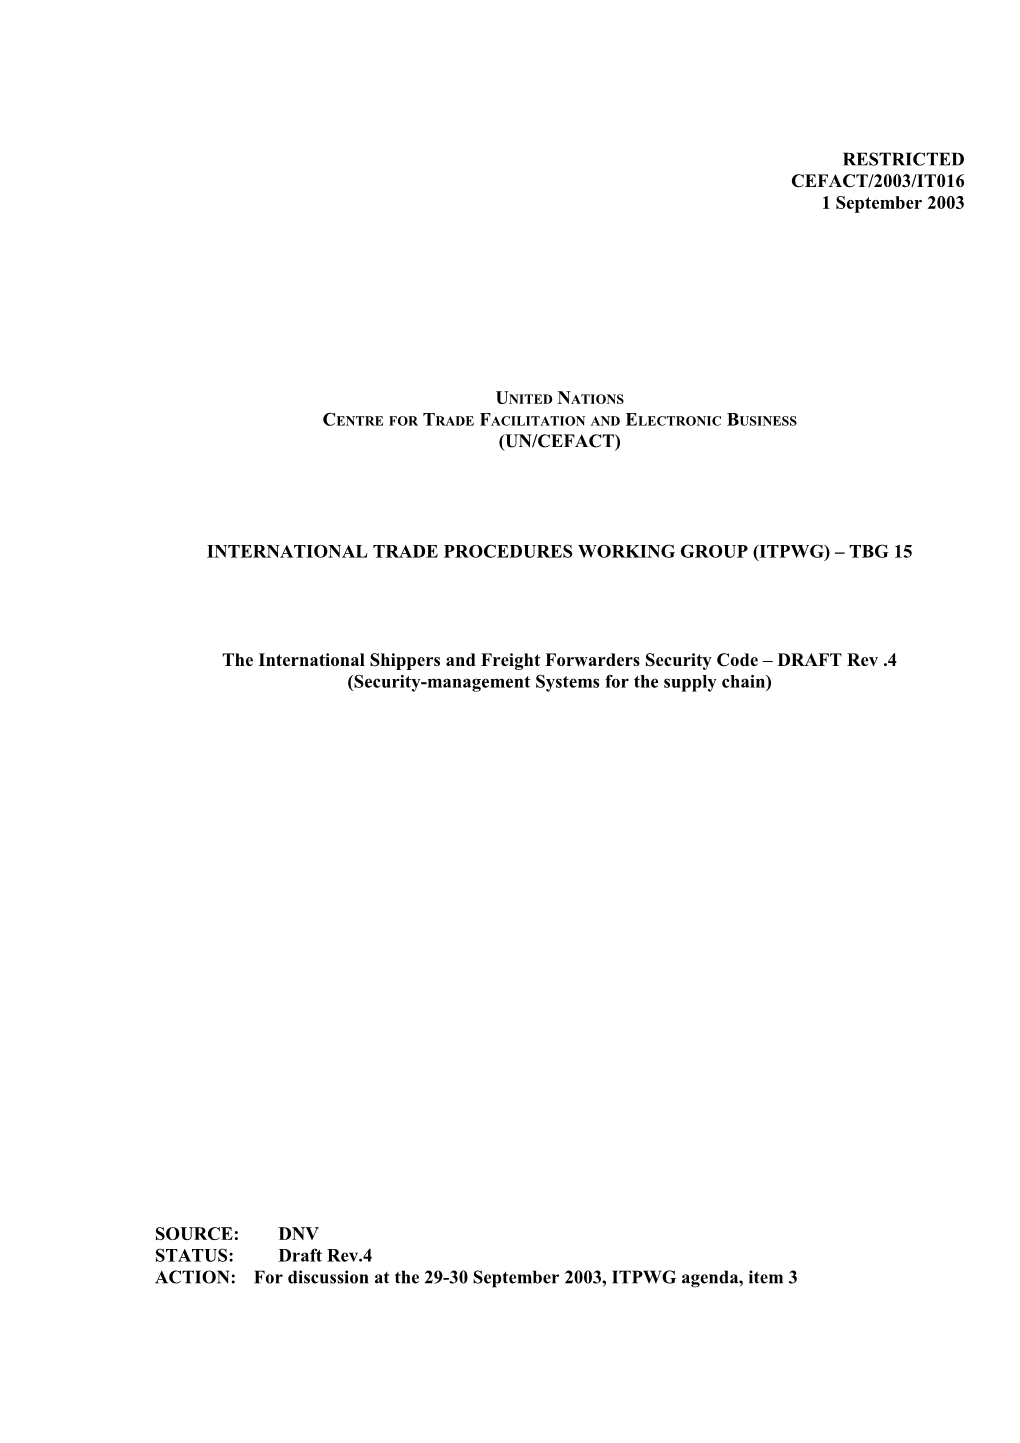 The International Shippers and Freight Forwarders Security Code (Draft)